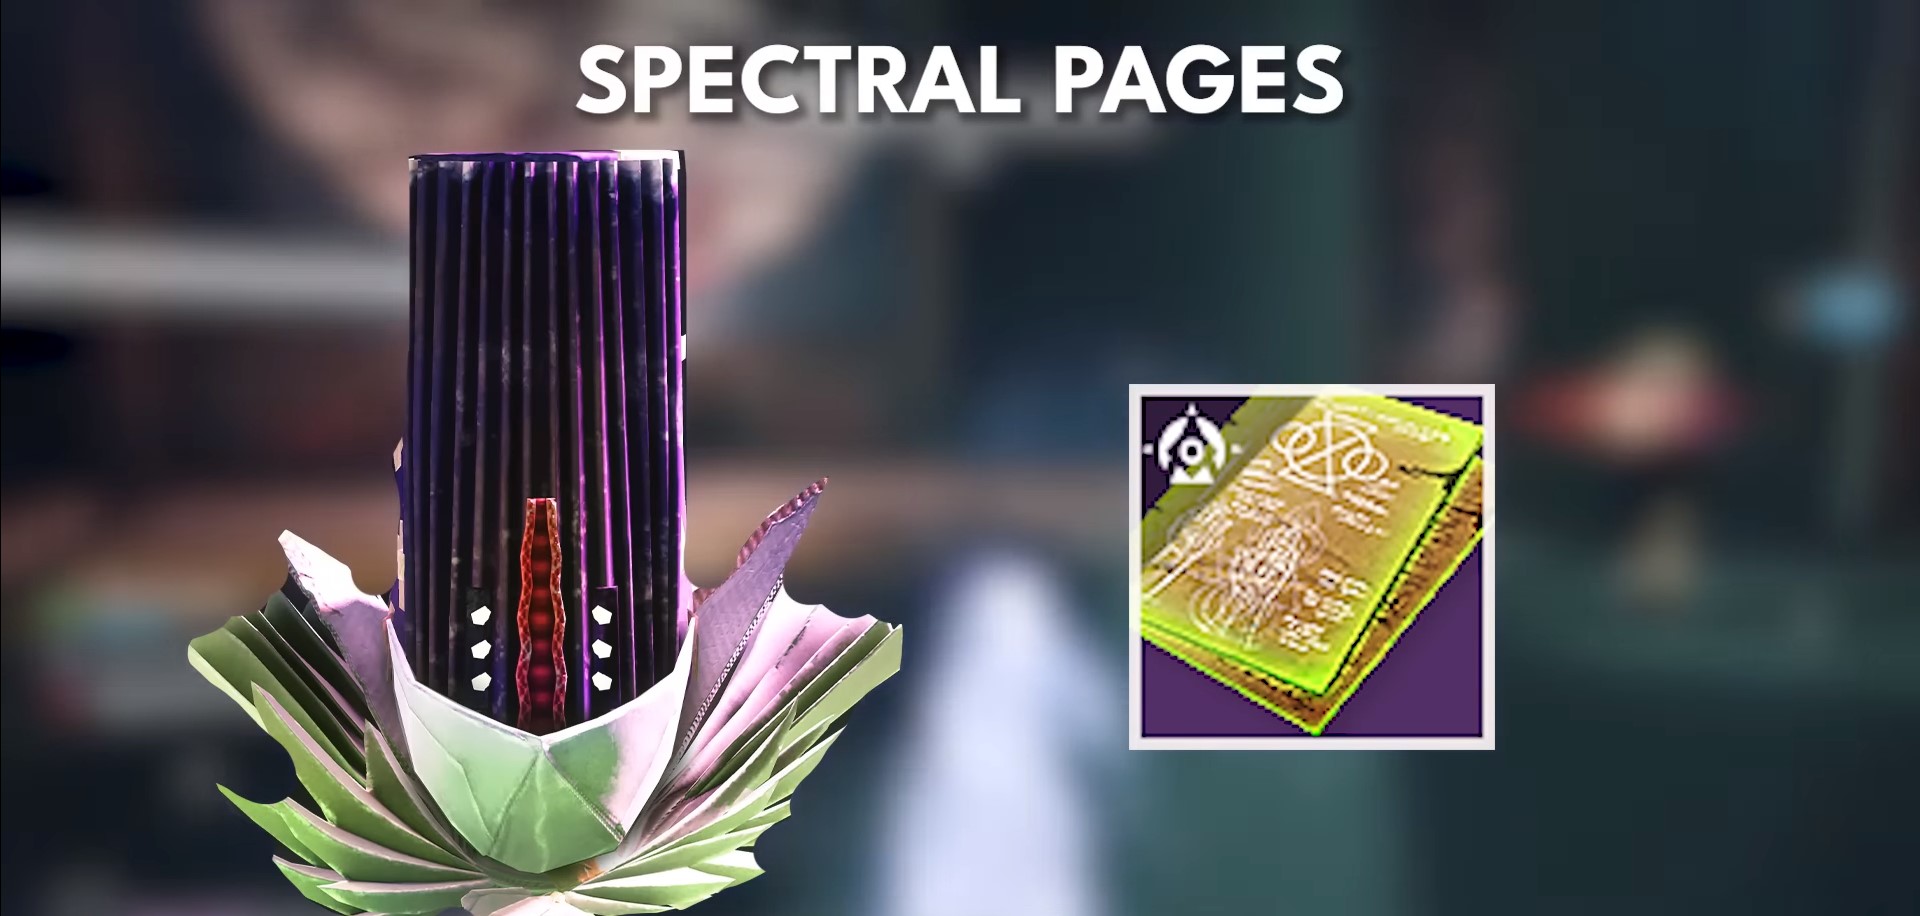 Spectral pages